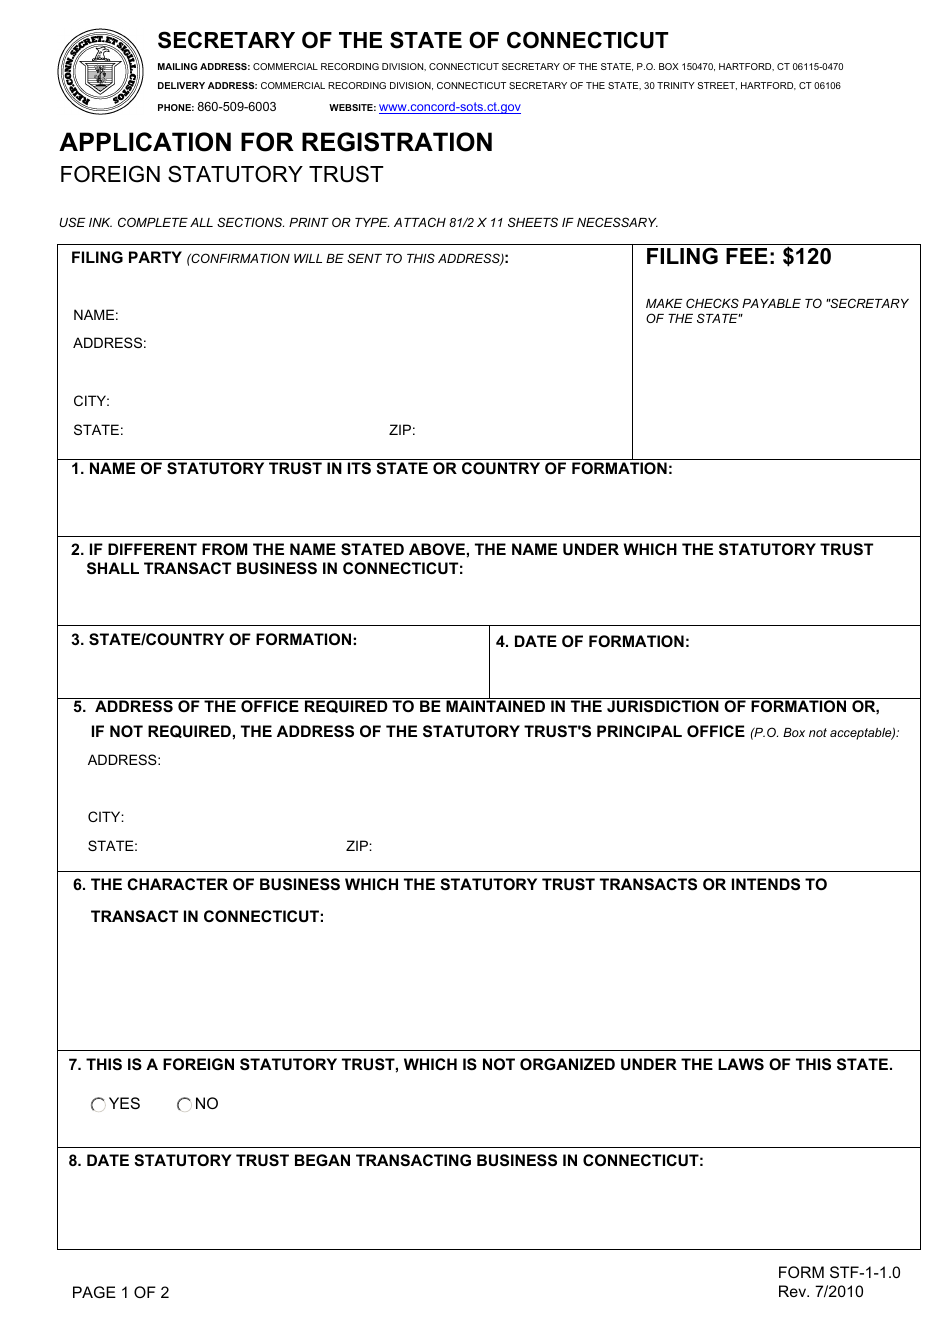 Form STF-1-1.0 Application for Registration - Foreign Statutory Trust - Connecticut, Page 1